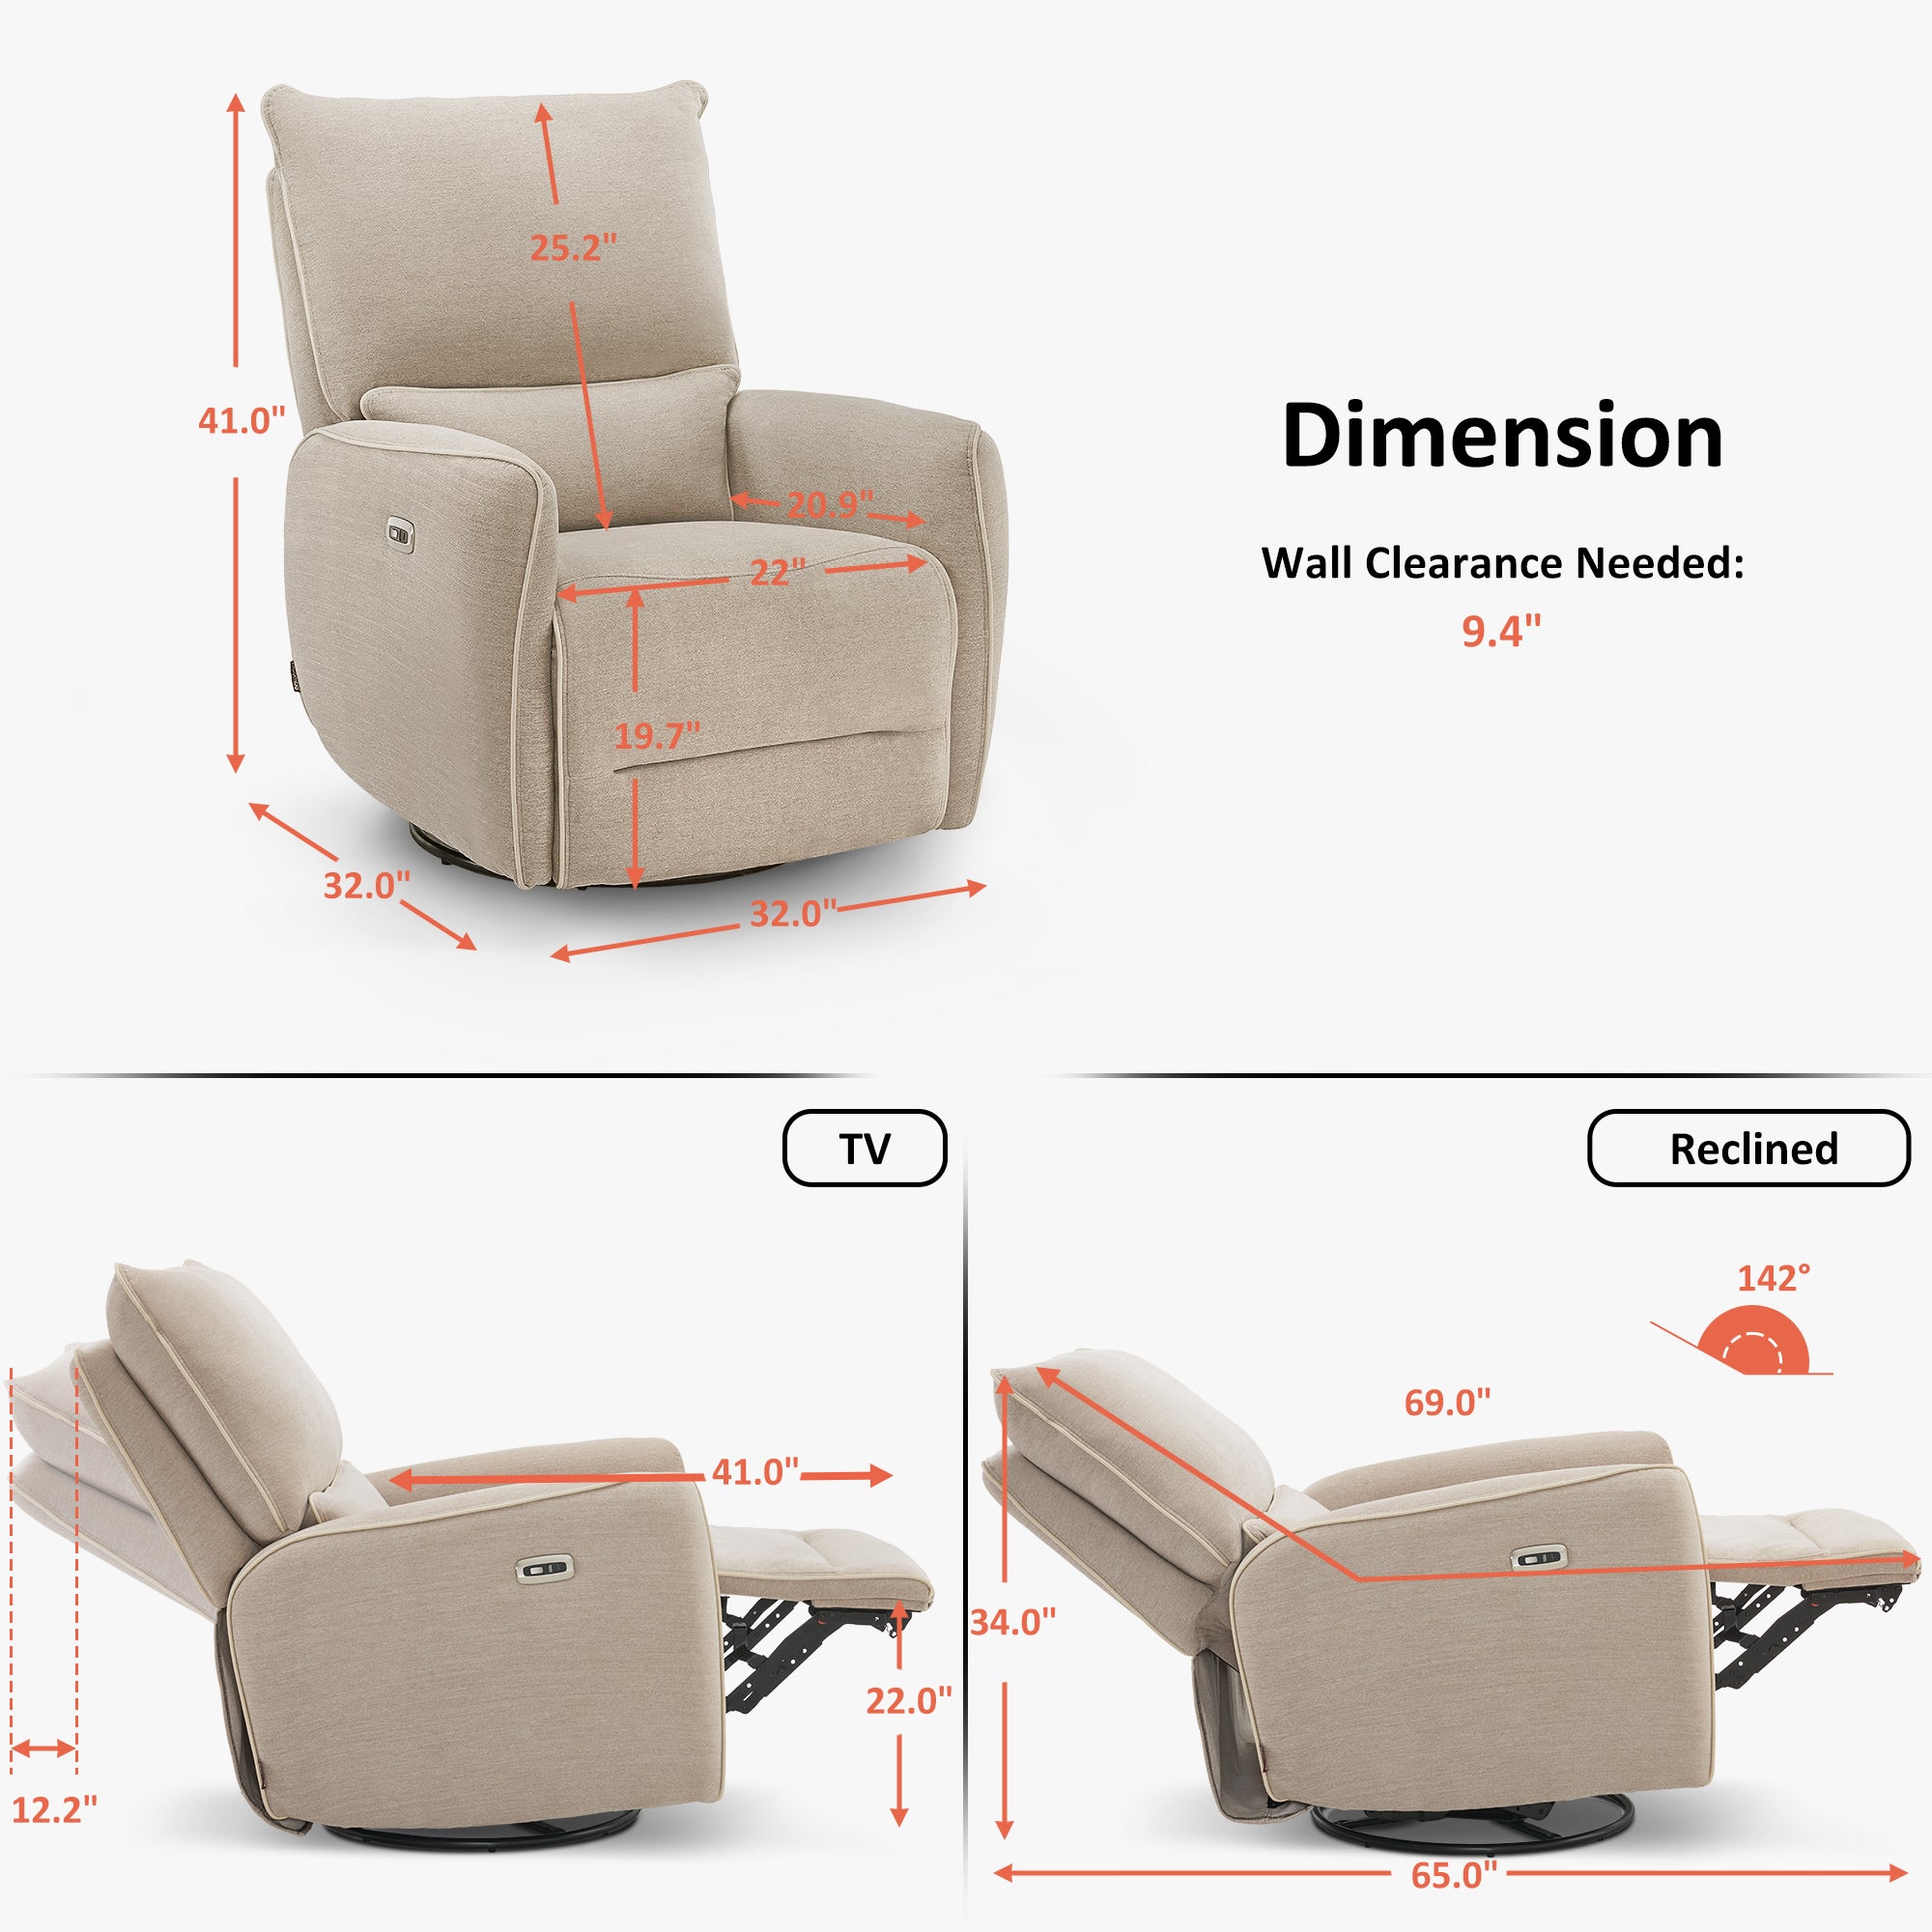 MCombo Power Swivel Glider Recliner Chair, Electric Rocker Recliner Chairs with USB Charging Ports for Living Room and Nursery, Fabric 6160-6922